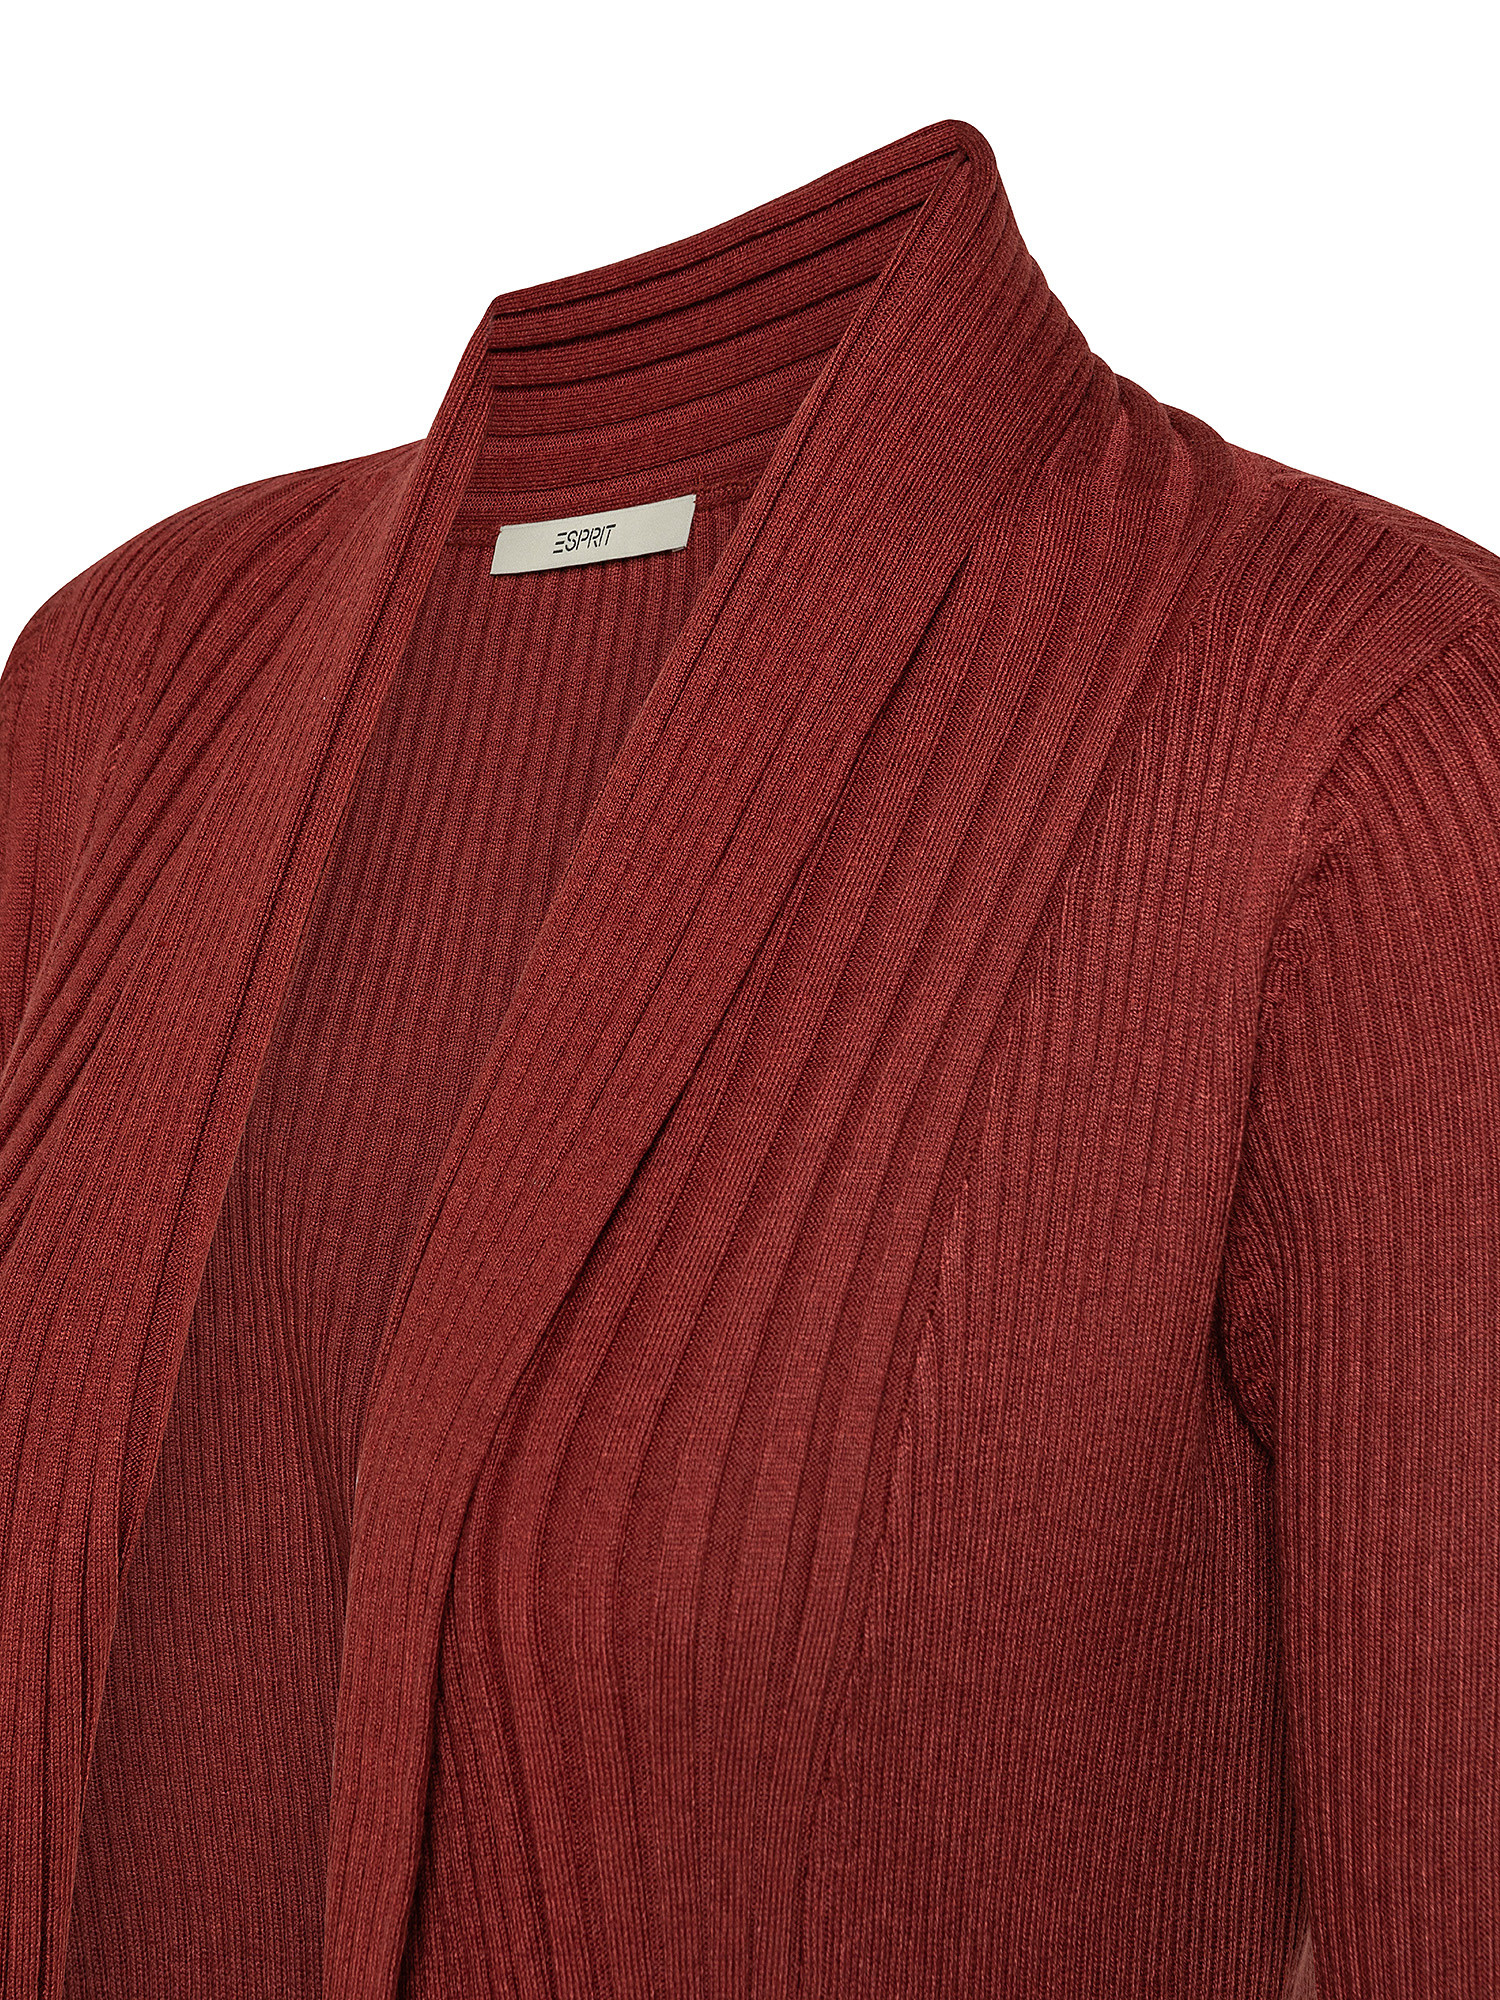 Cardigan aperto a coste, Rosso mattone, large image number 2